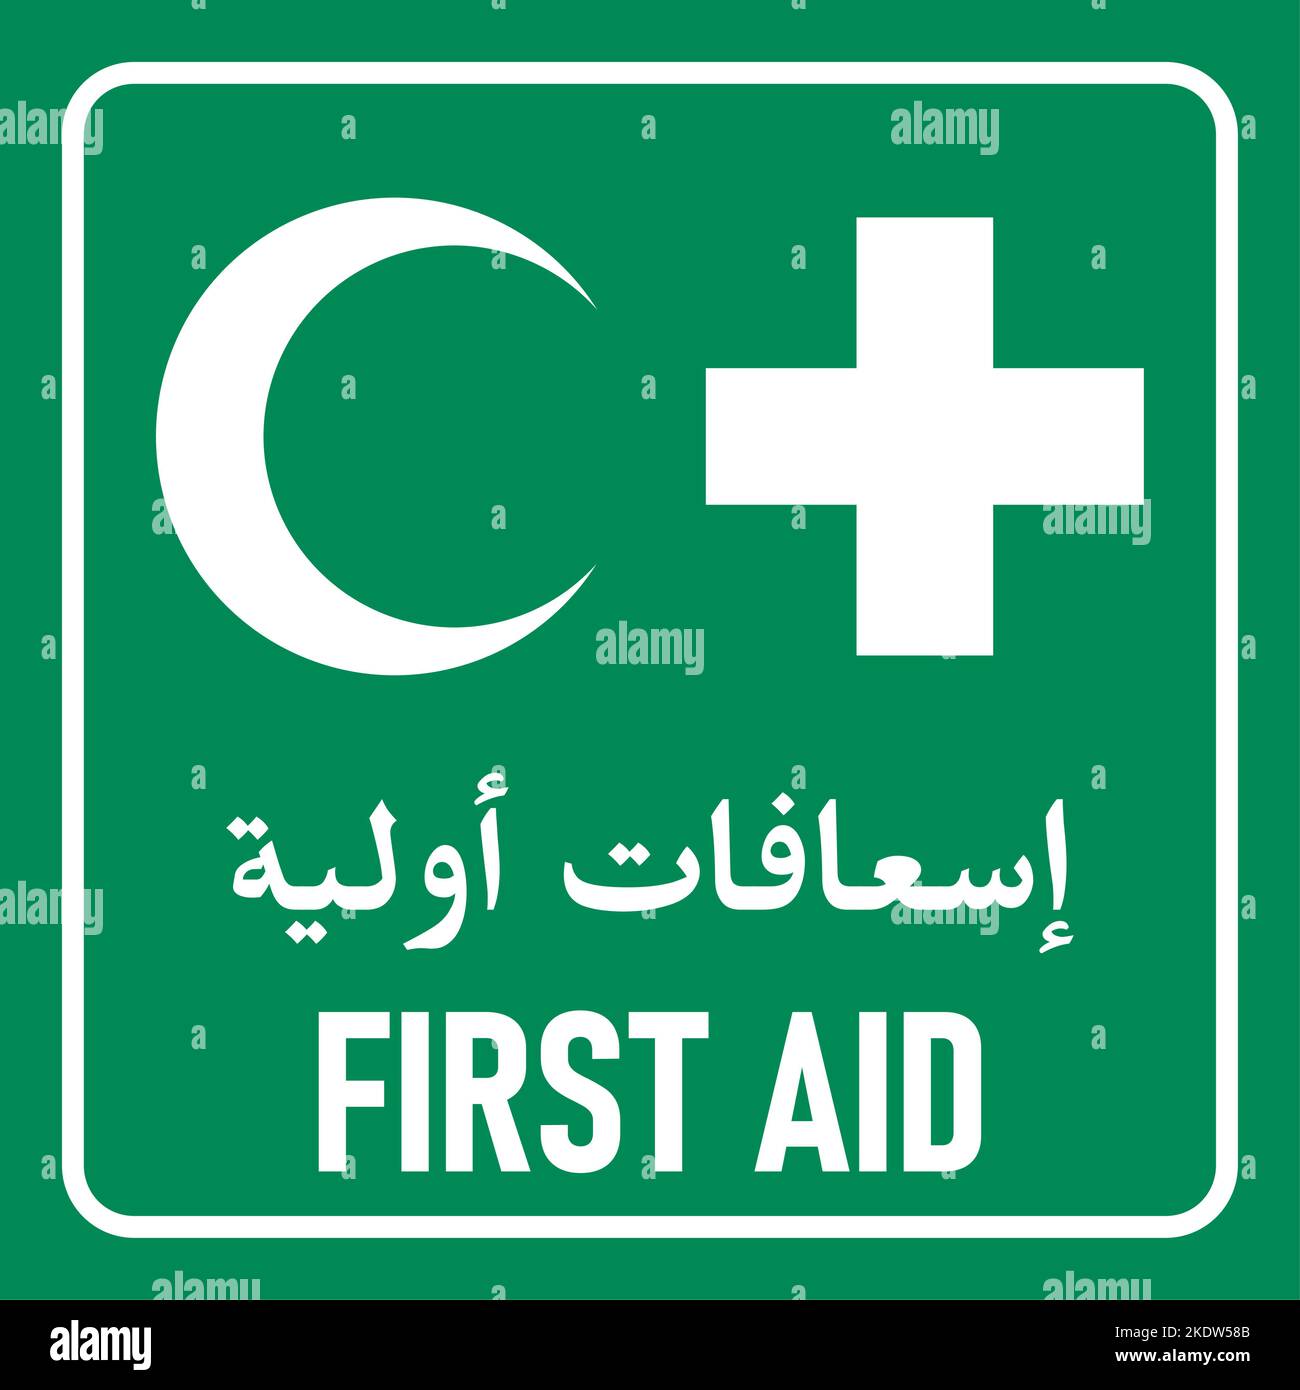 Green First Aid Box Icon in English and Arabic with Crescent or Half Moon and Cross Symbol. Vector Image. Stock Vector